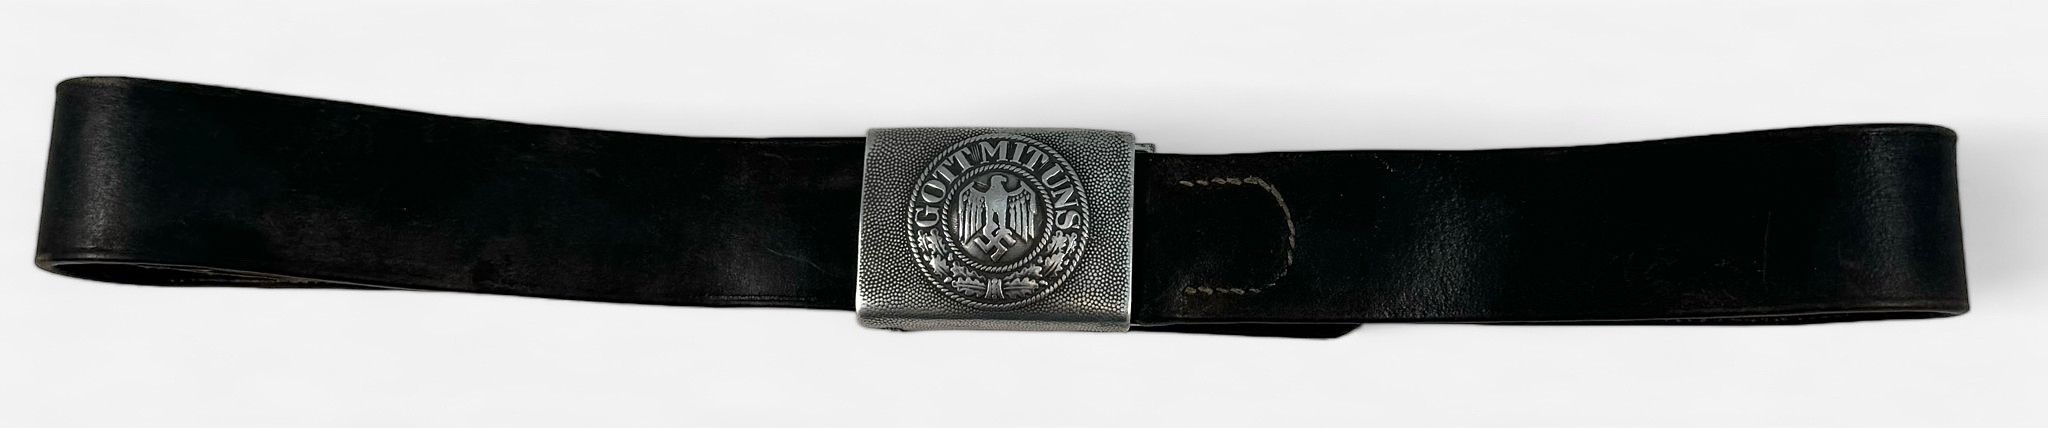 A WWII German Third Reich Heer Enlisted Mans Belt and Buckle with leather belt, 2nd Pattern, 'J-7'